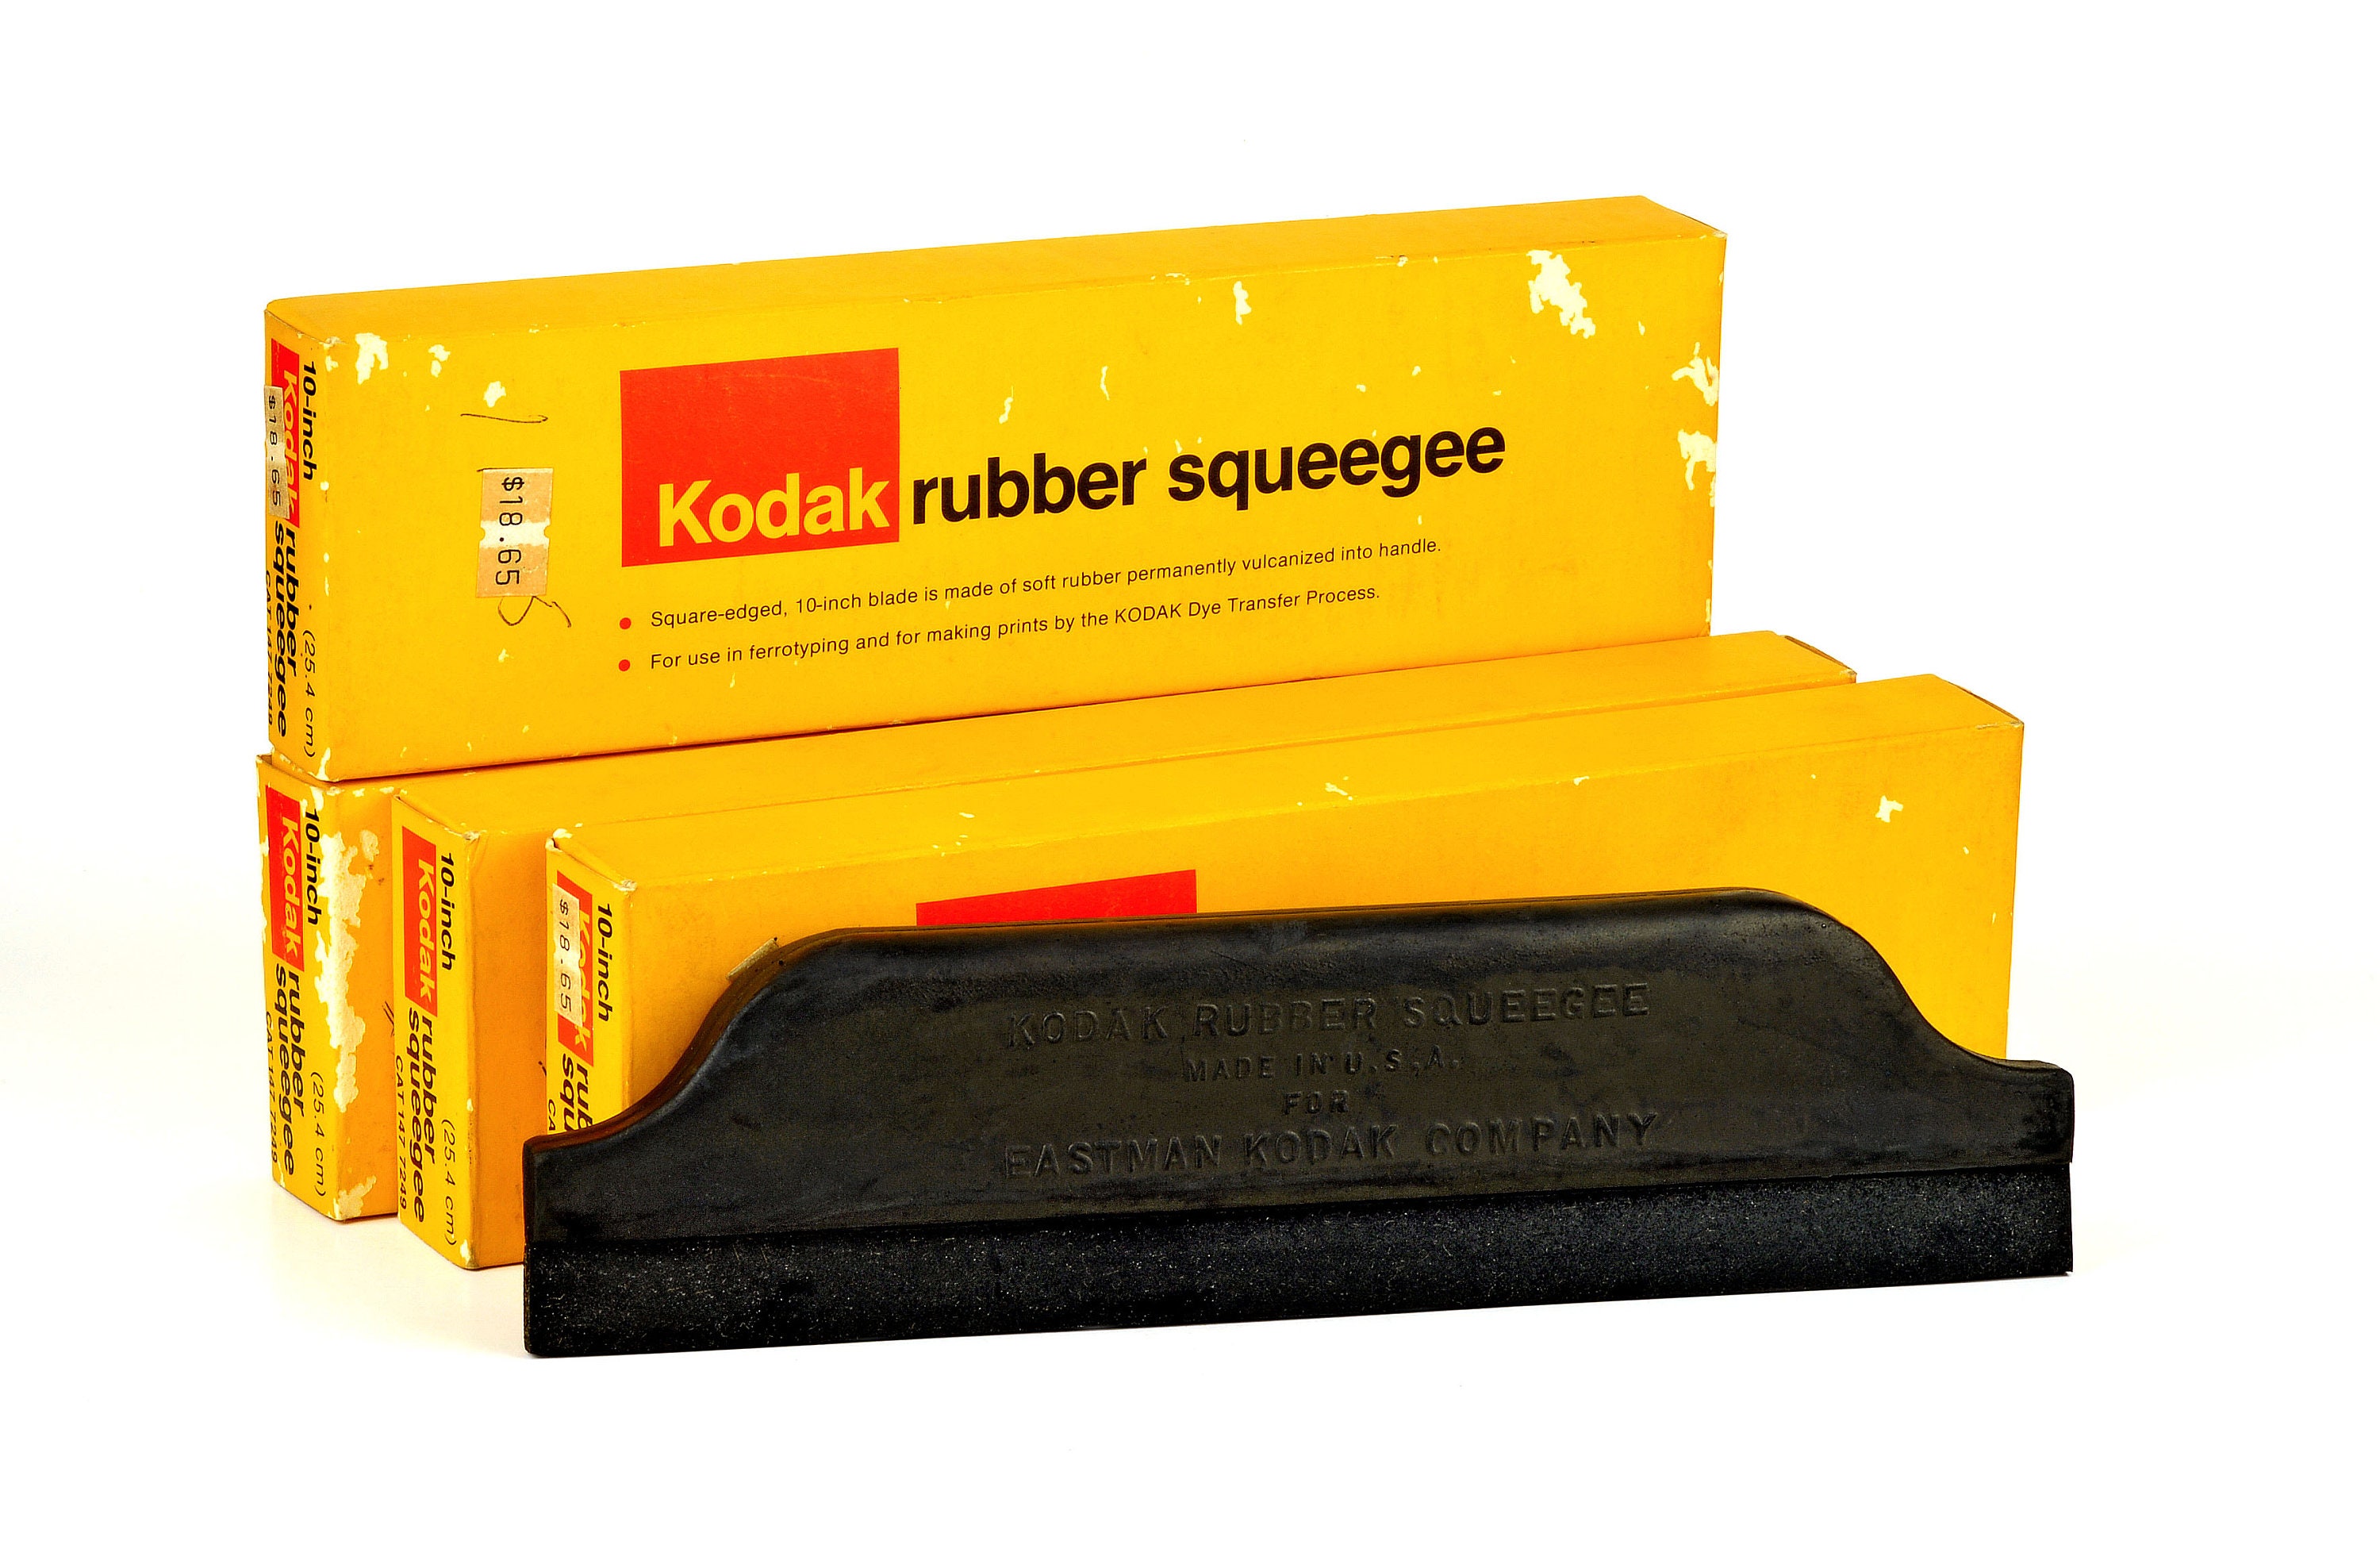 3M Wetordry Small Rubber Squeegee - 3 Inch x 2 Inch